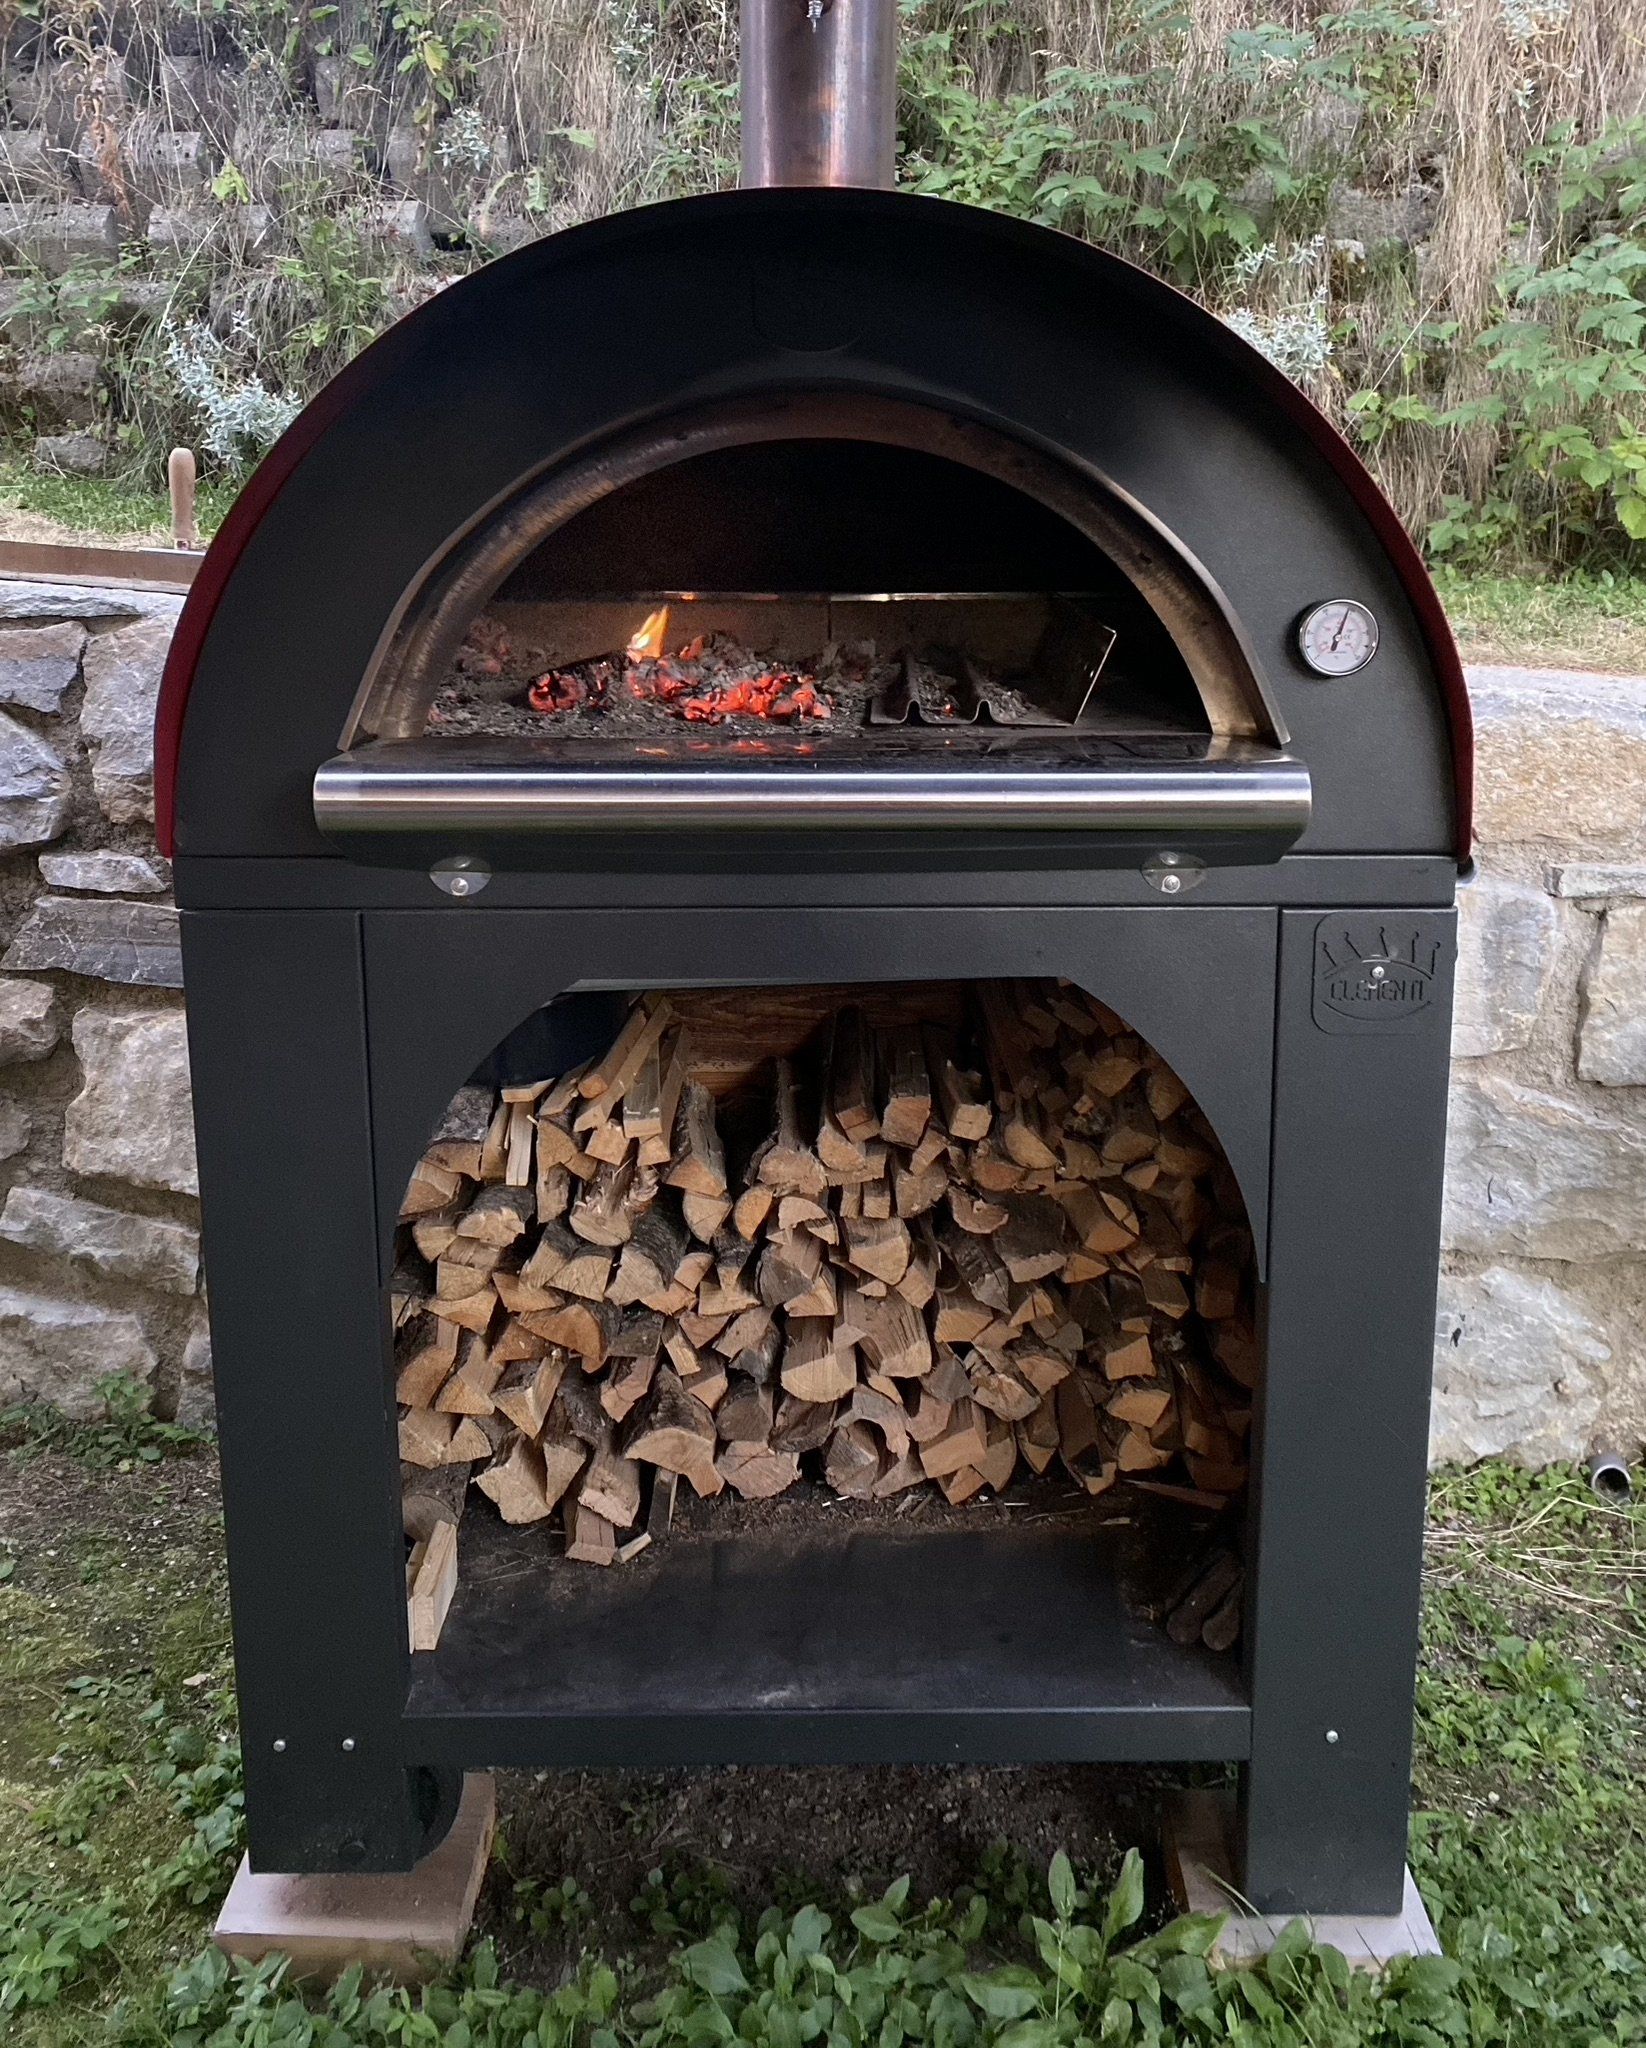 The Chalet Marmotte Pizza Oven